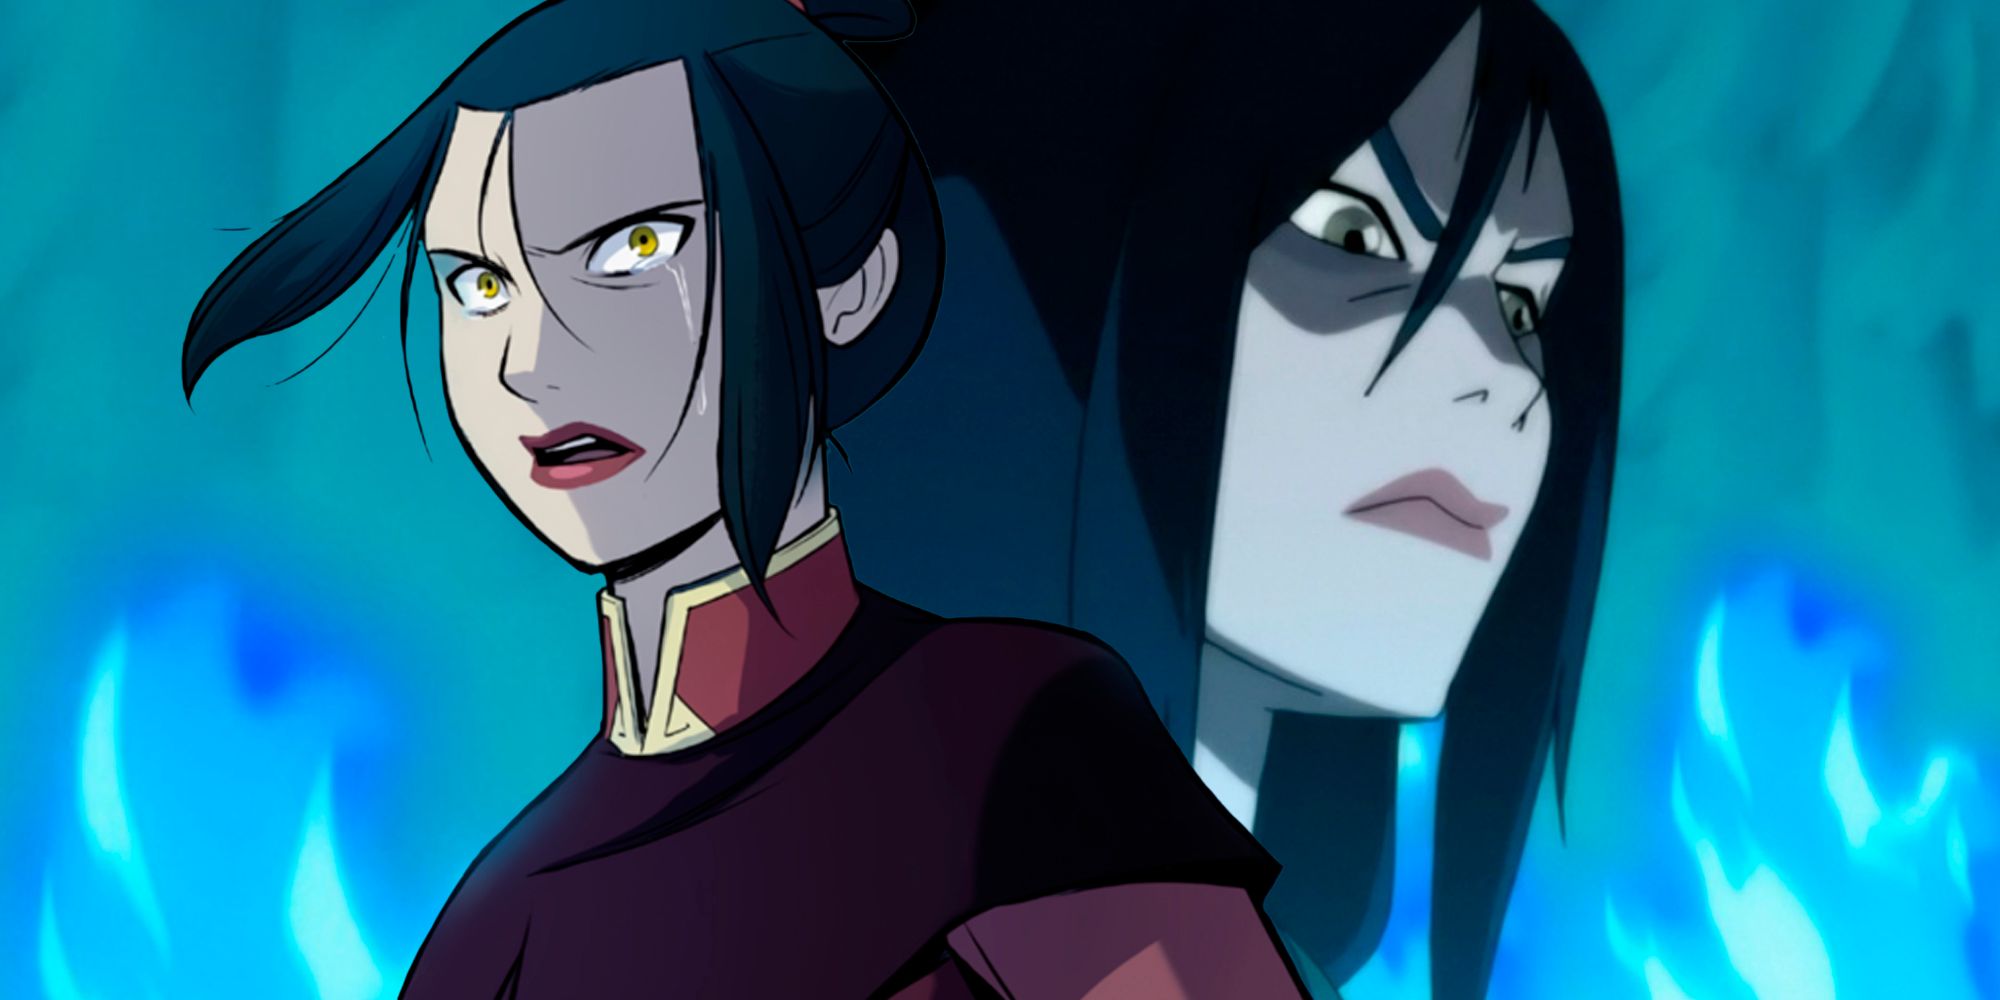 A blended image features Azula in the animated Avatar series and the comic book